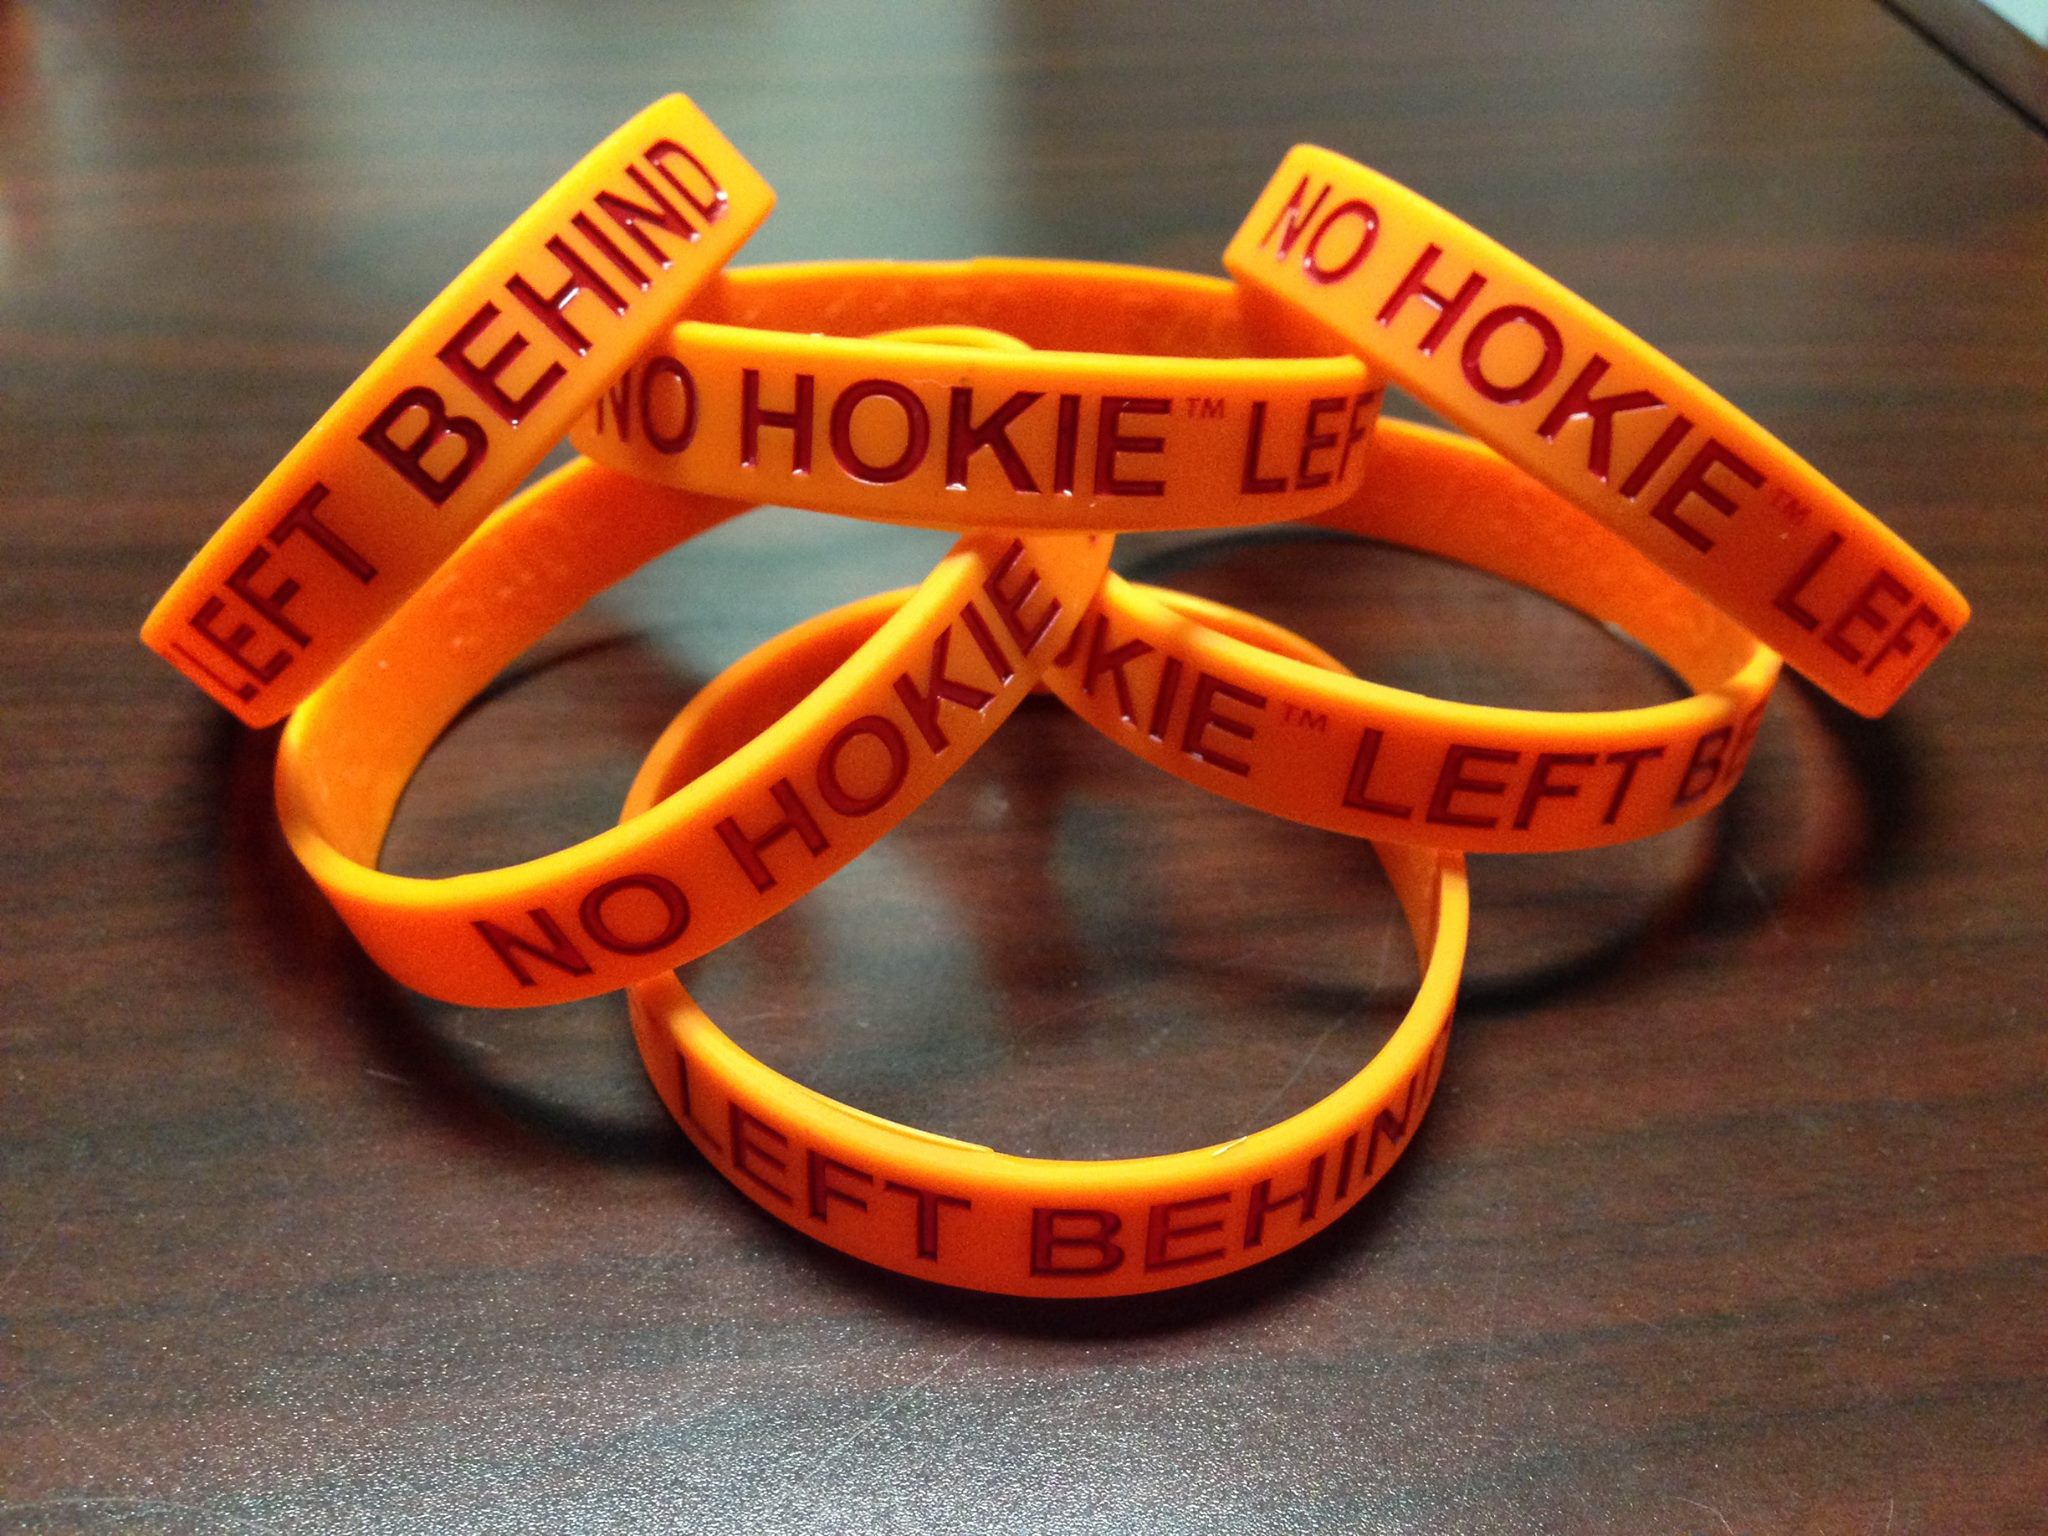 Bracelets for students who take the No Hokie Left Behind pledge.